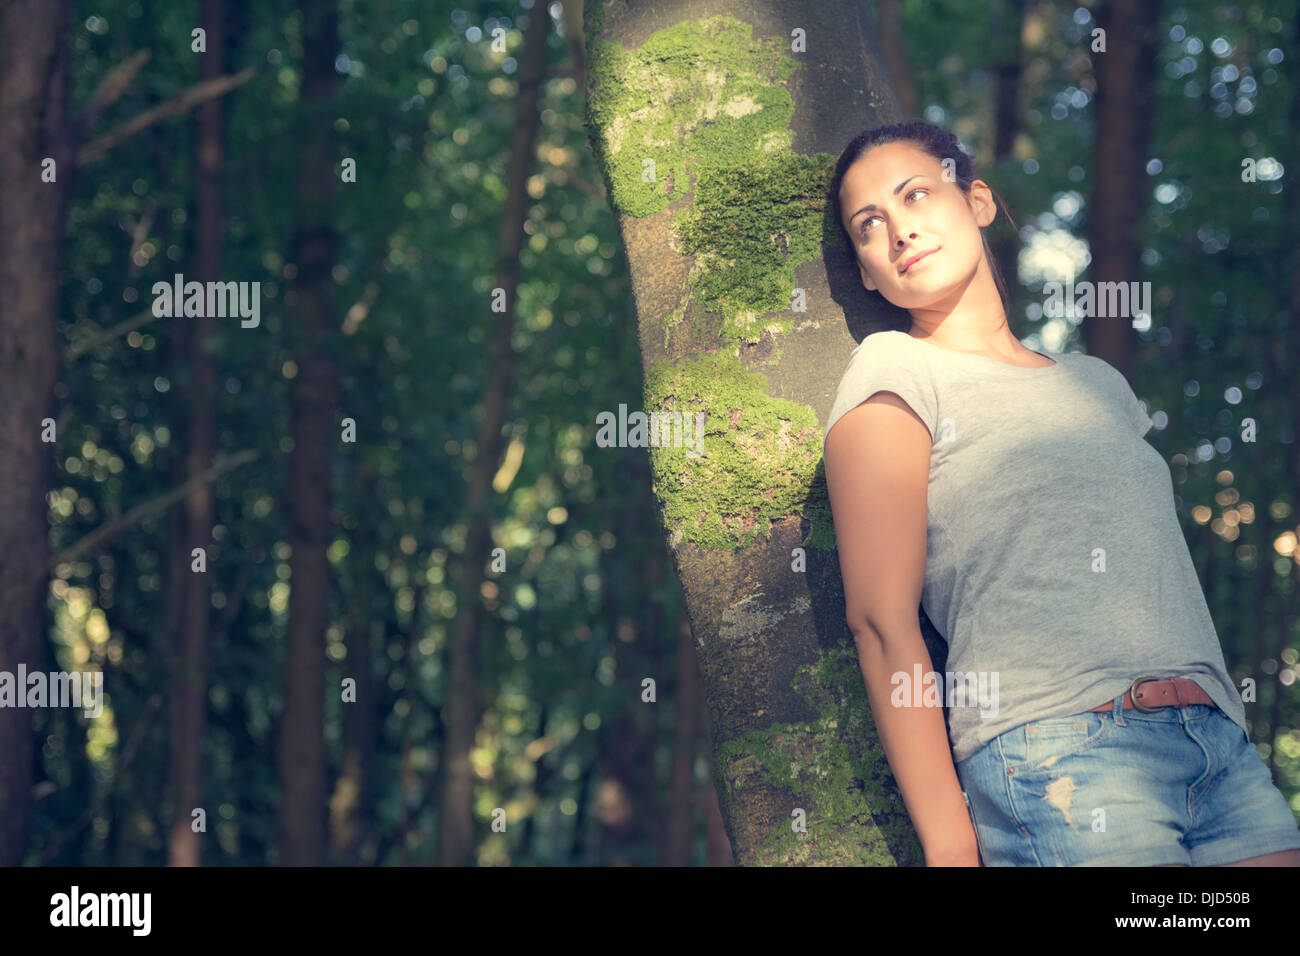 Cute casual woman leaning against a tree Banque D'Images